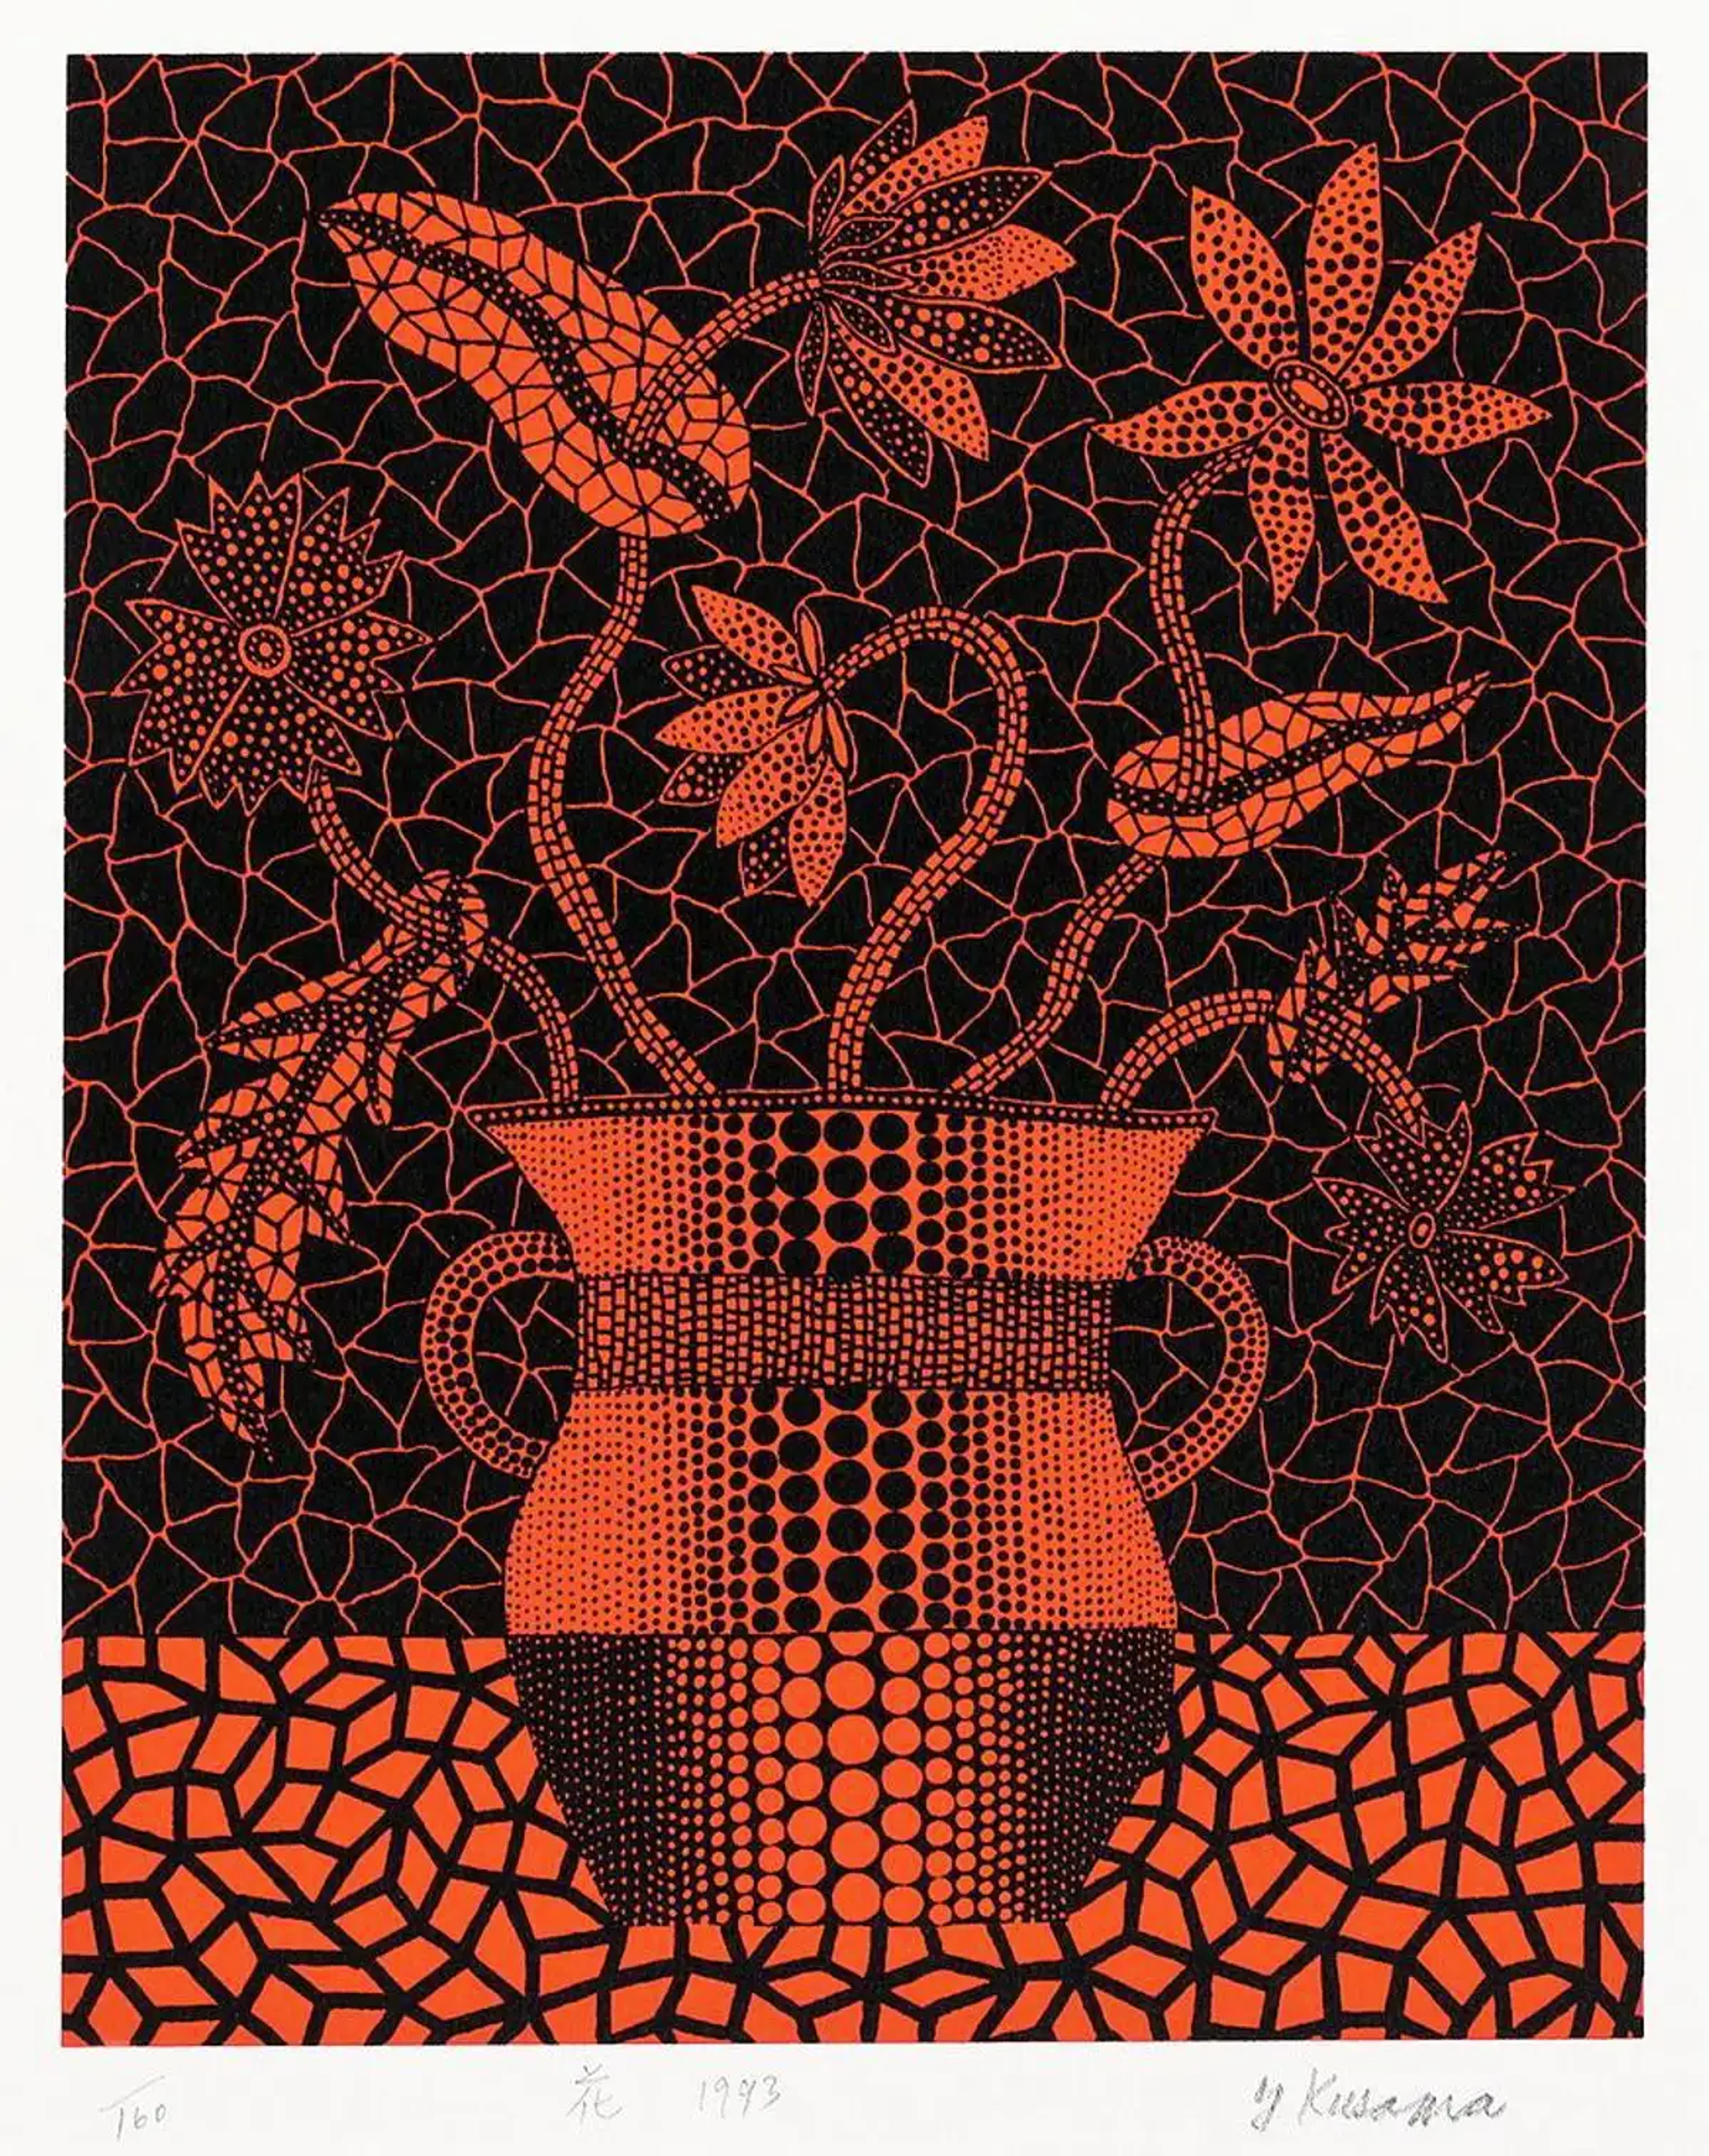 Yayoi Kusama’s Flowers, Kusaama 181A screenprint of a flower vase made of black and red polka dots holding flowers made of black and red polka dots and geometric designs. 